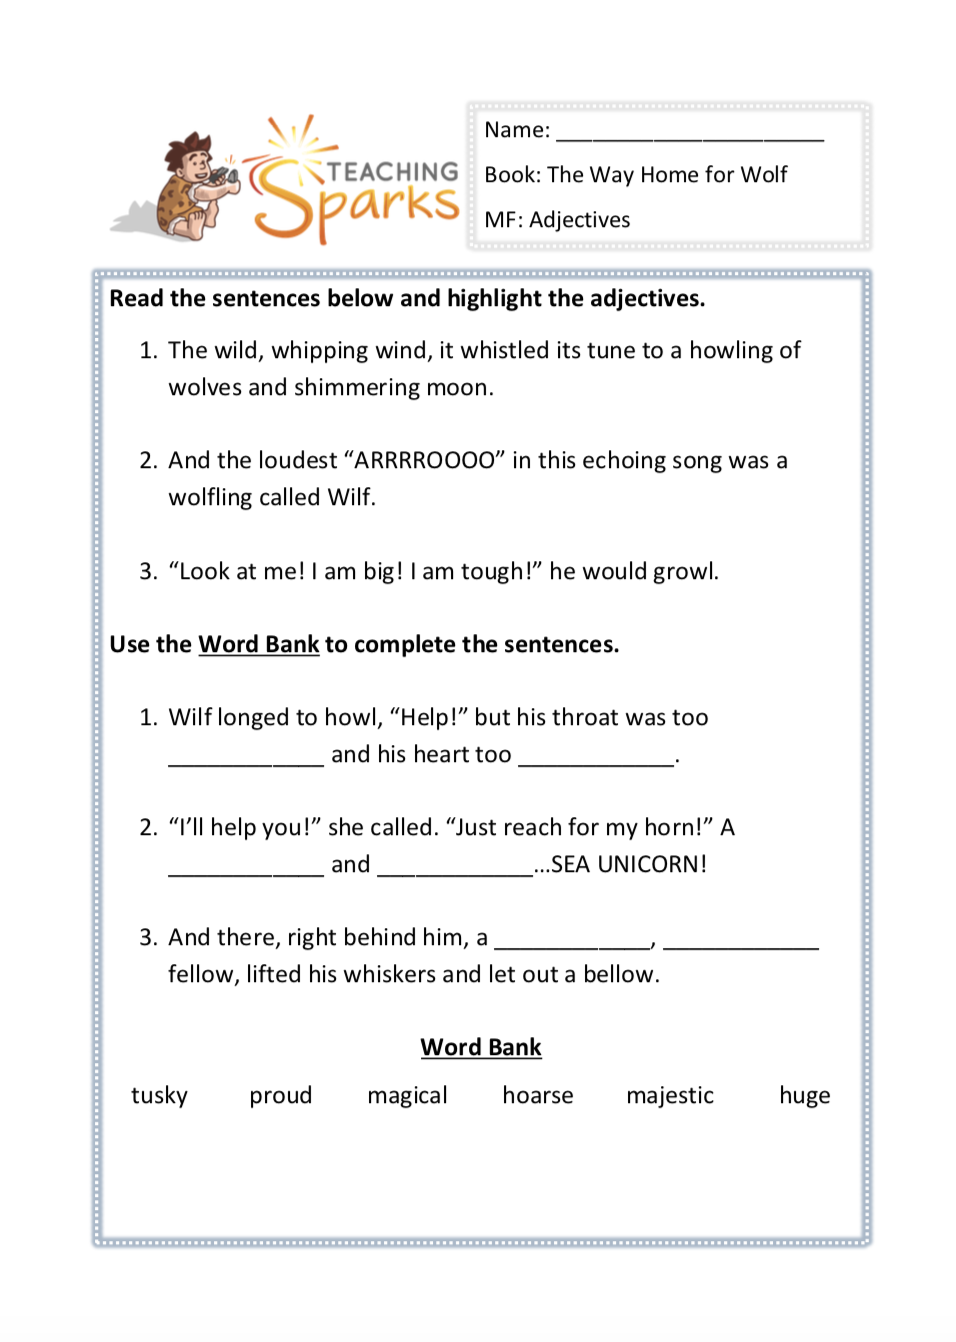 the-way-home-for-wolf-reading-resources-comprehension-activities-ks1